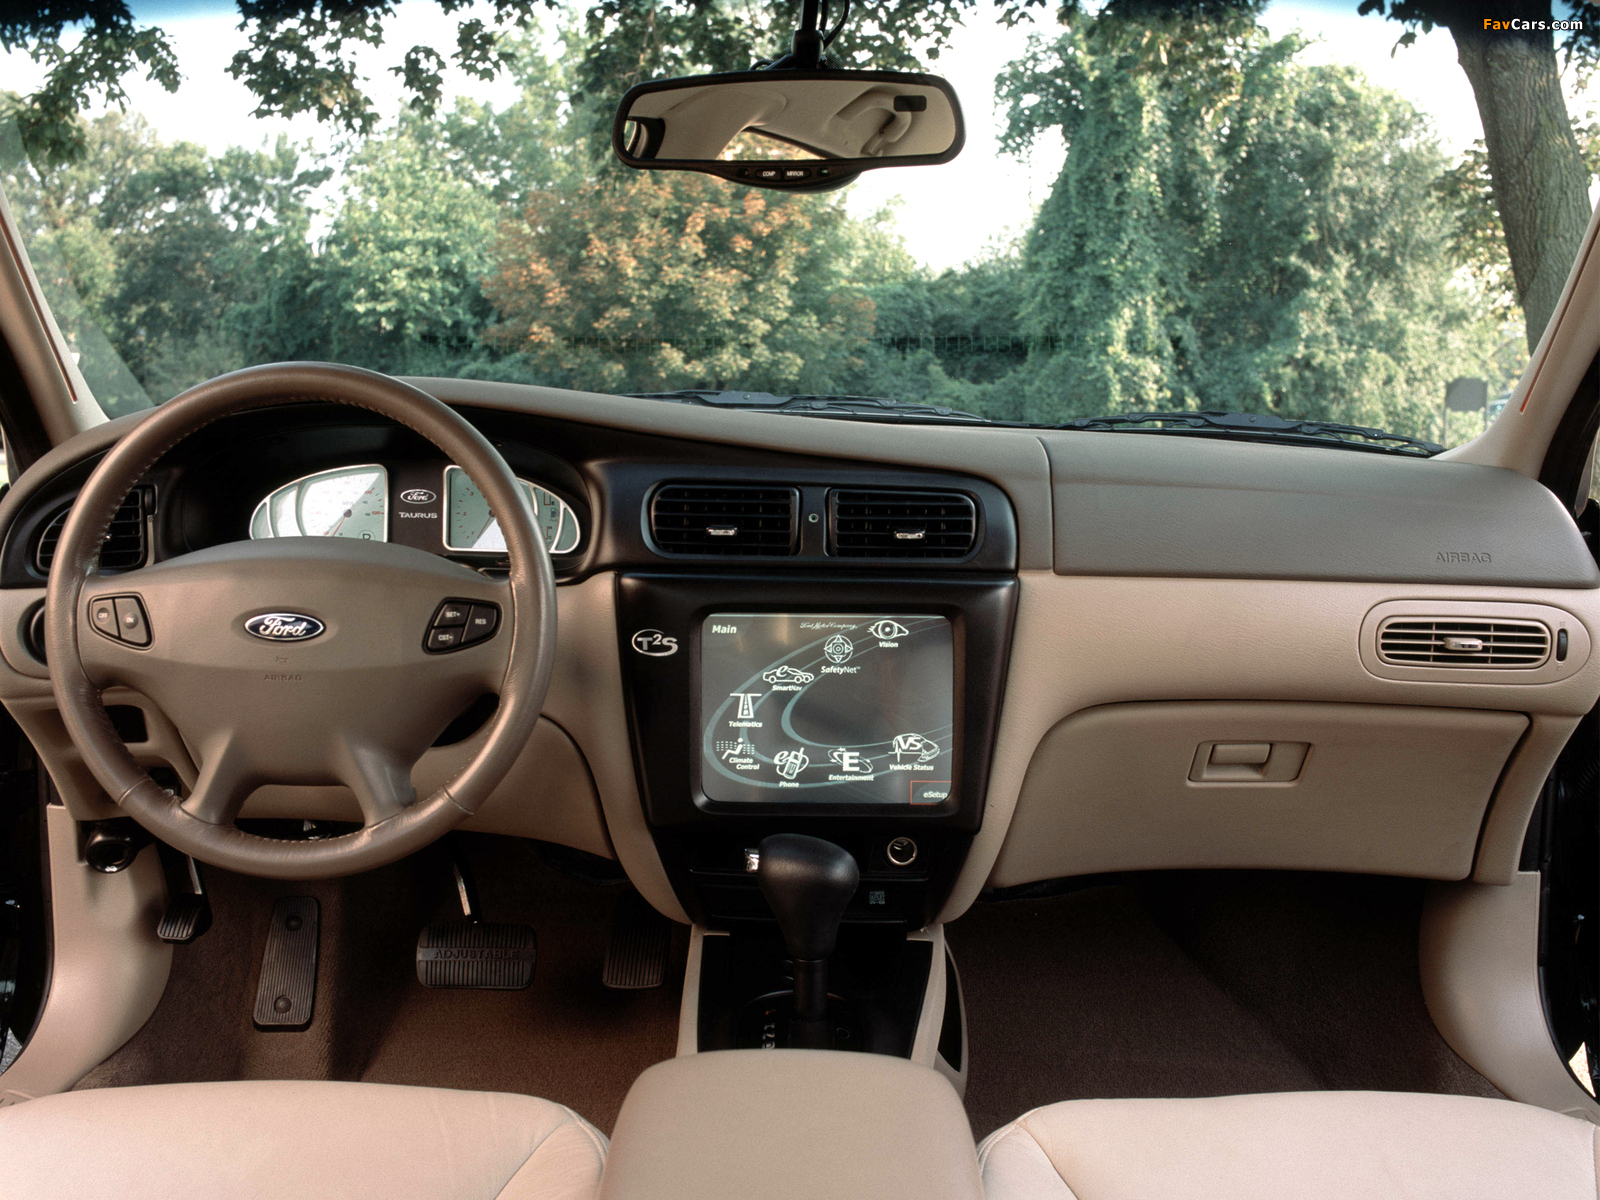 Ford Taurus Safety Concept 2003 photos (1600 x 1200)